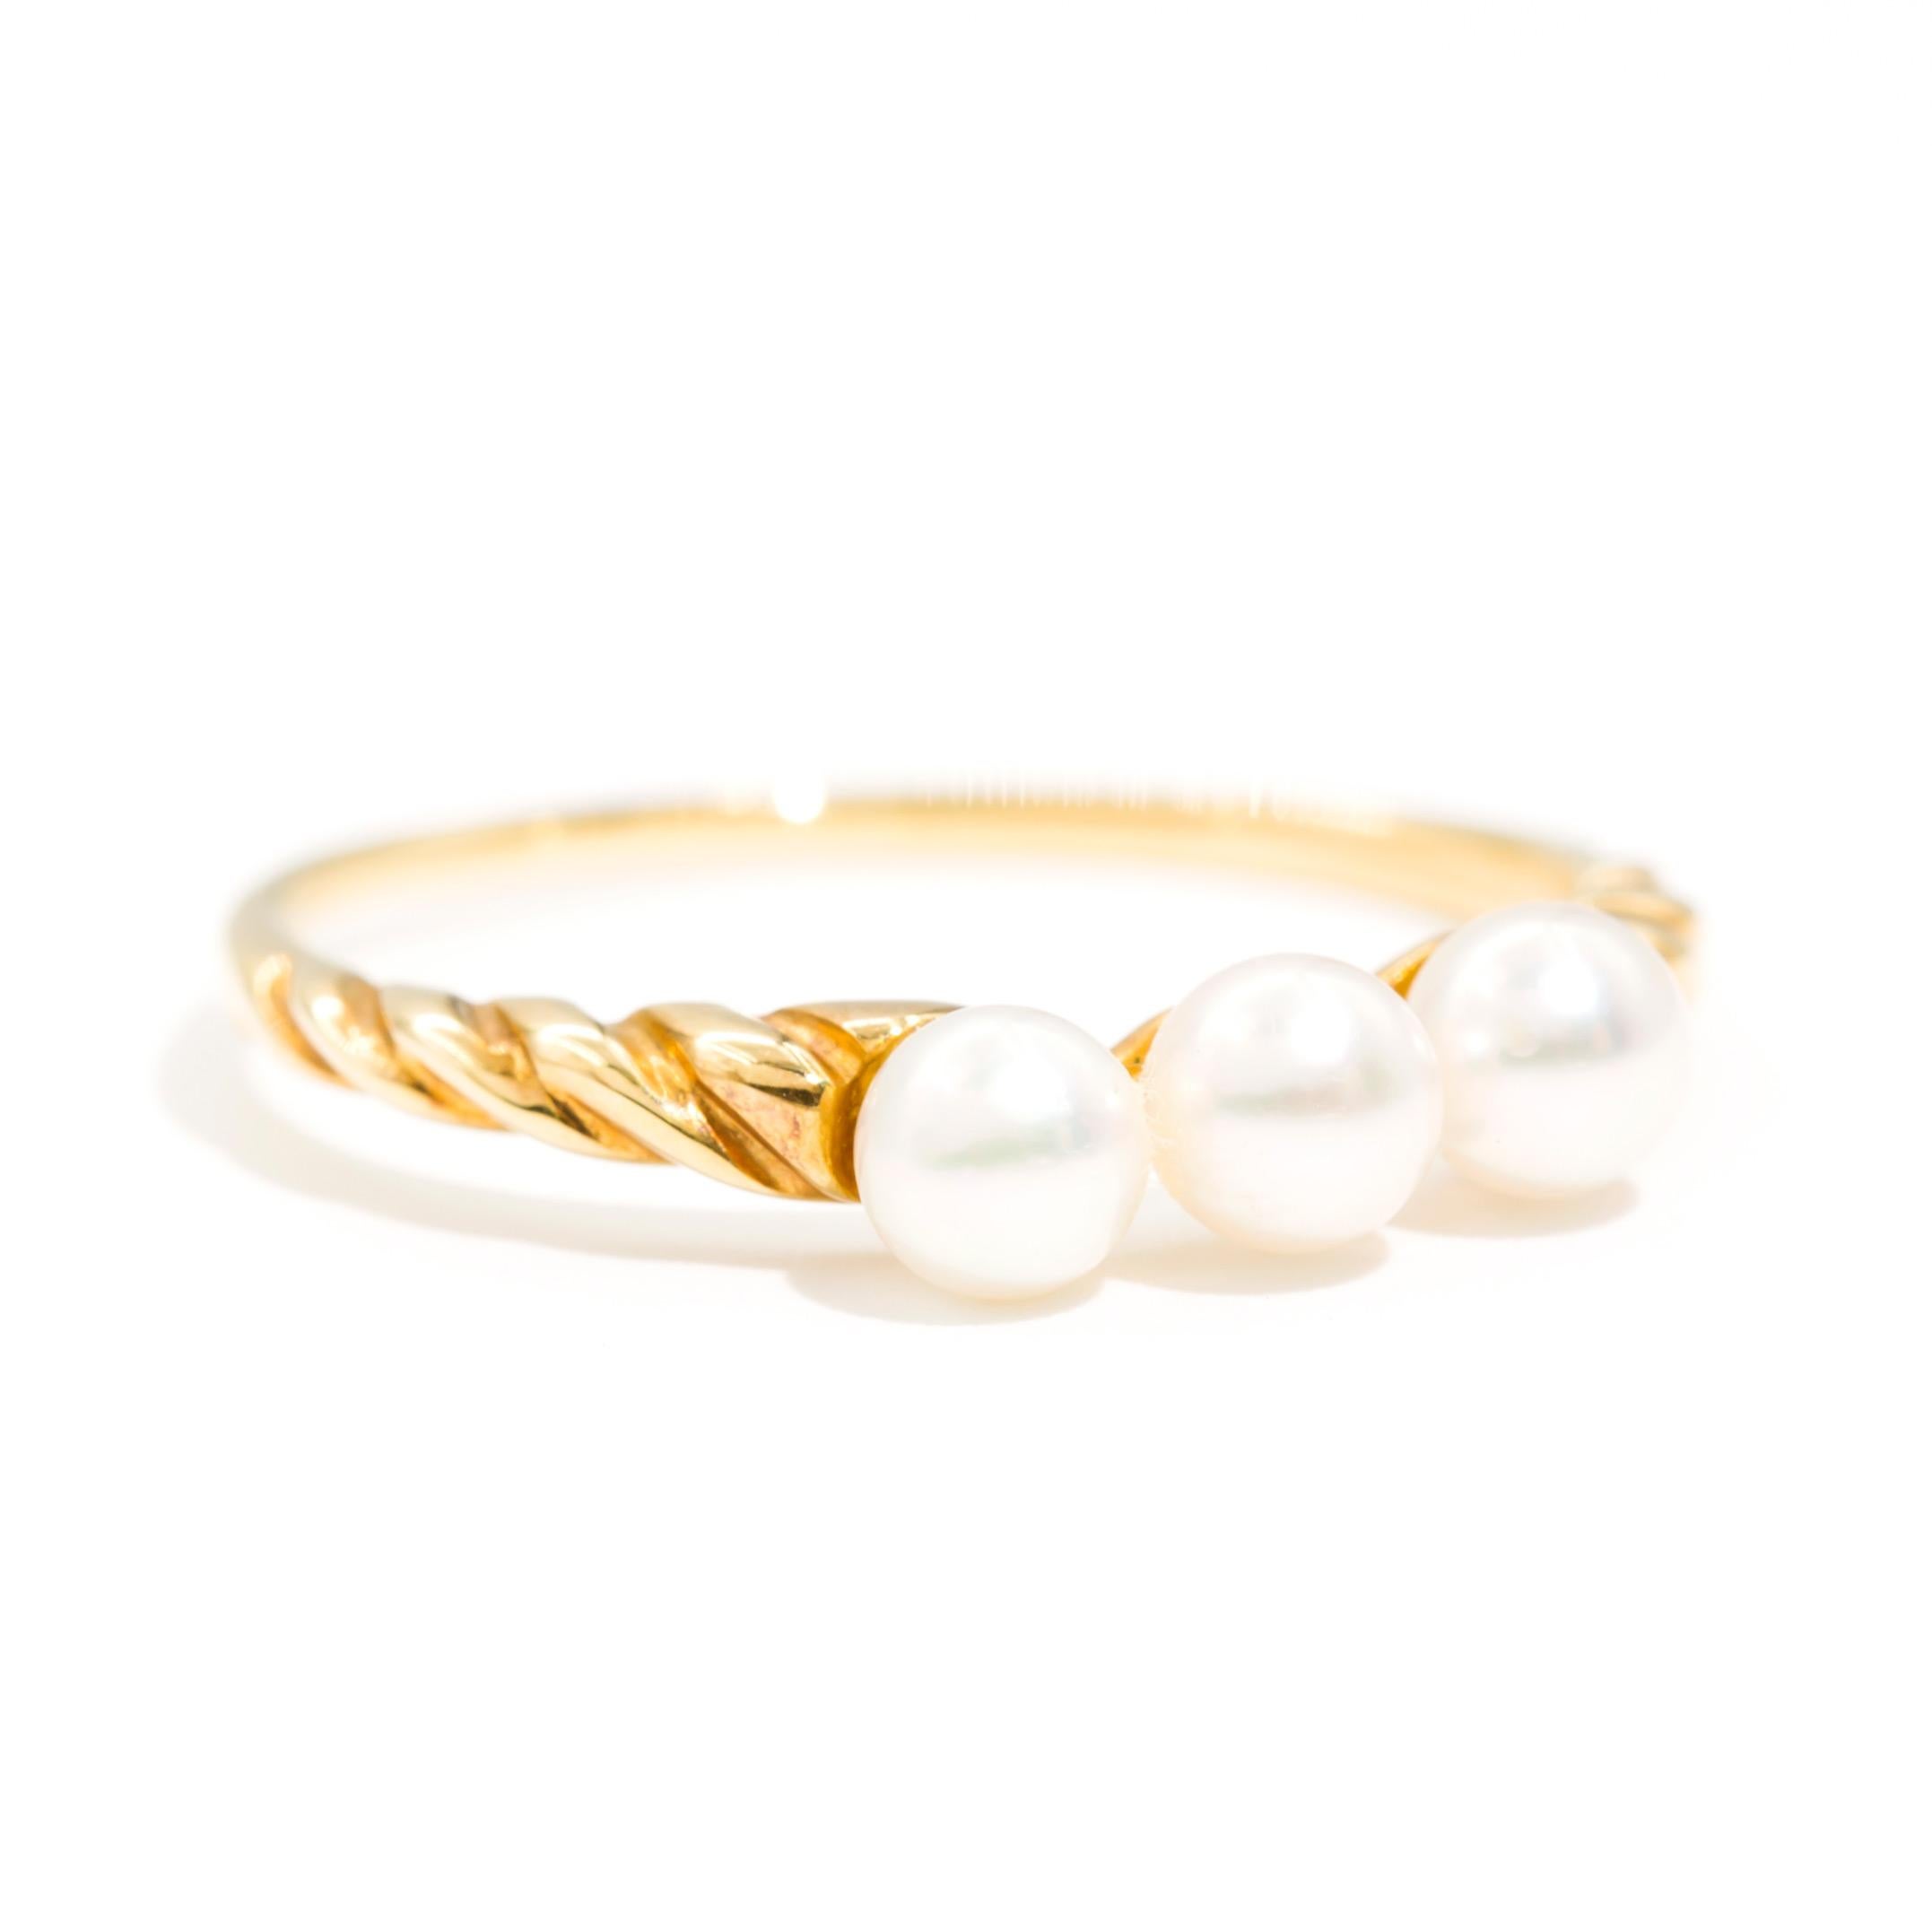 Carefully crafted in 18 Carat yellow gold is this ever so sweet vintage Mikimoto three pearl ring. Each lustrous cultured pearl measures approximately 3.8 millimetres, and are beautifully set side by side. This gorgeous Mikimoto ring invokes